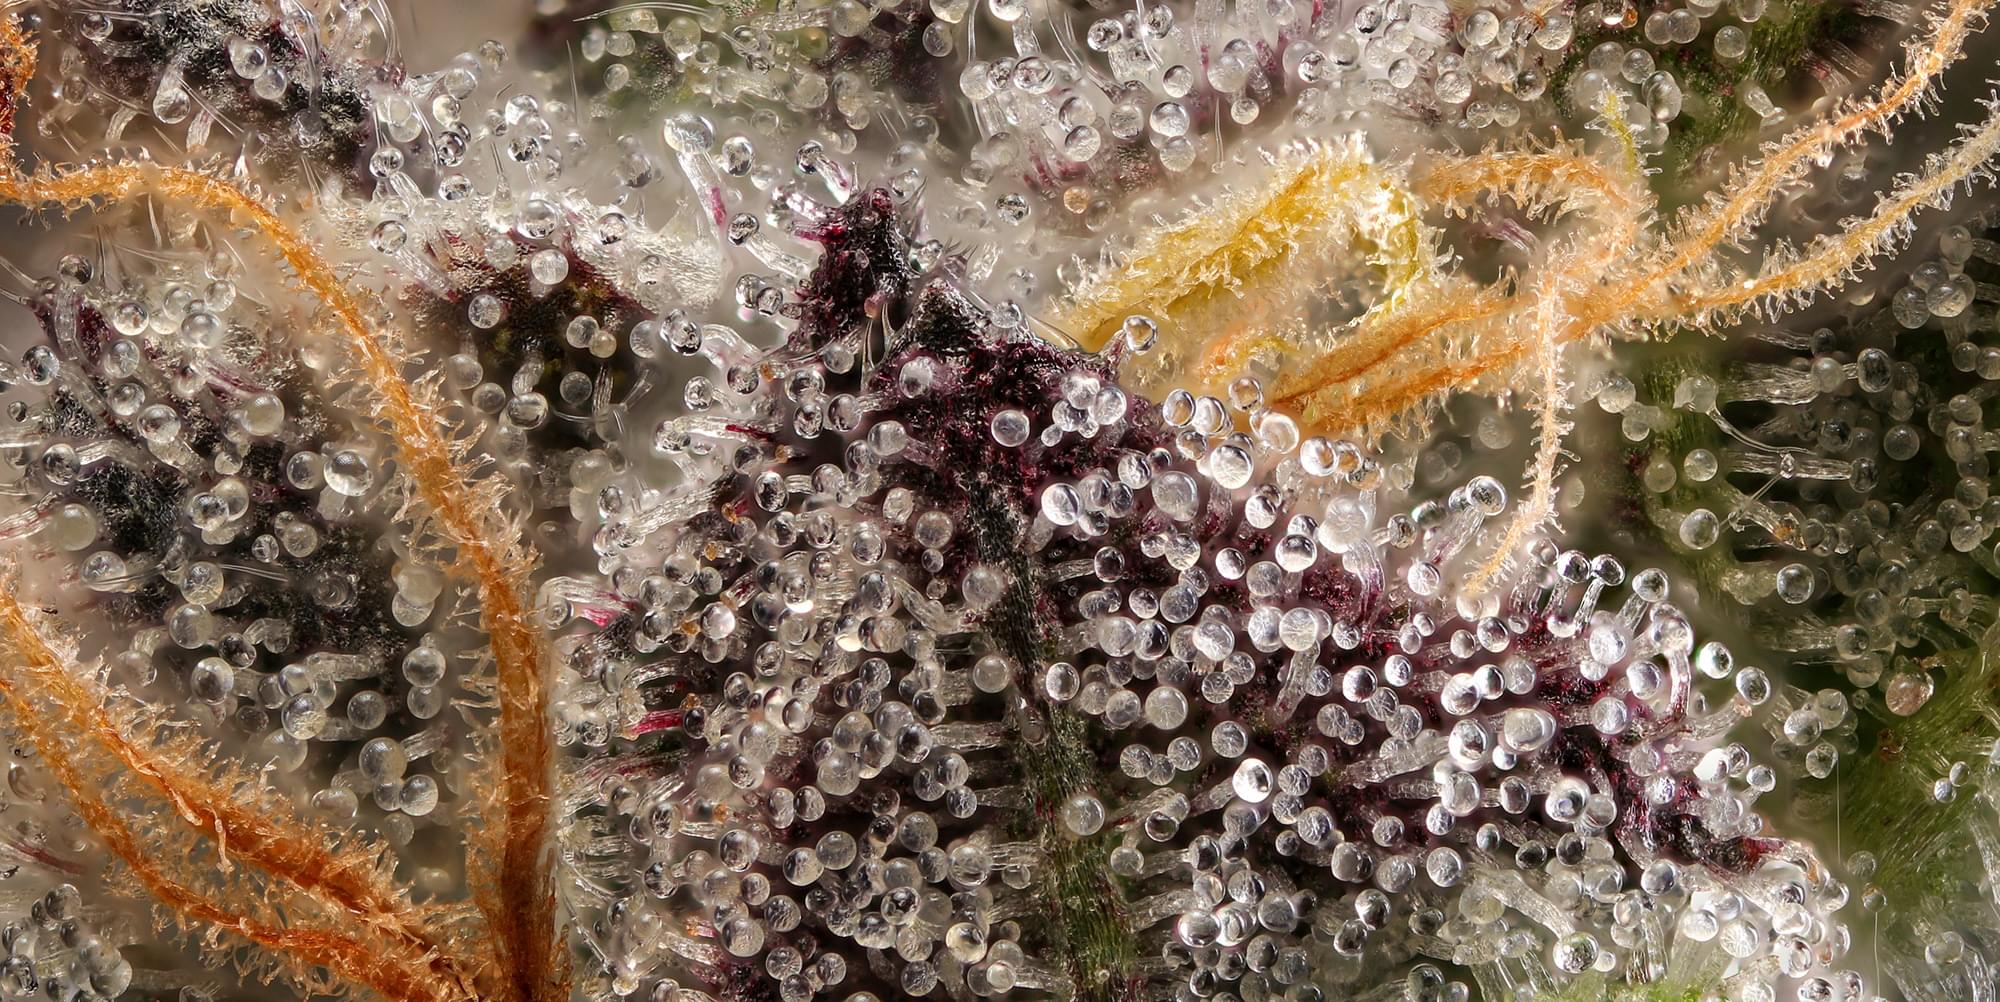 Trichomes close-up